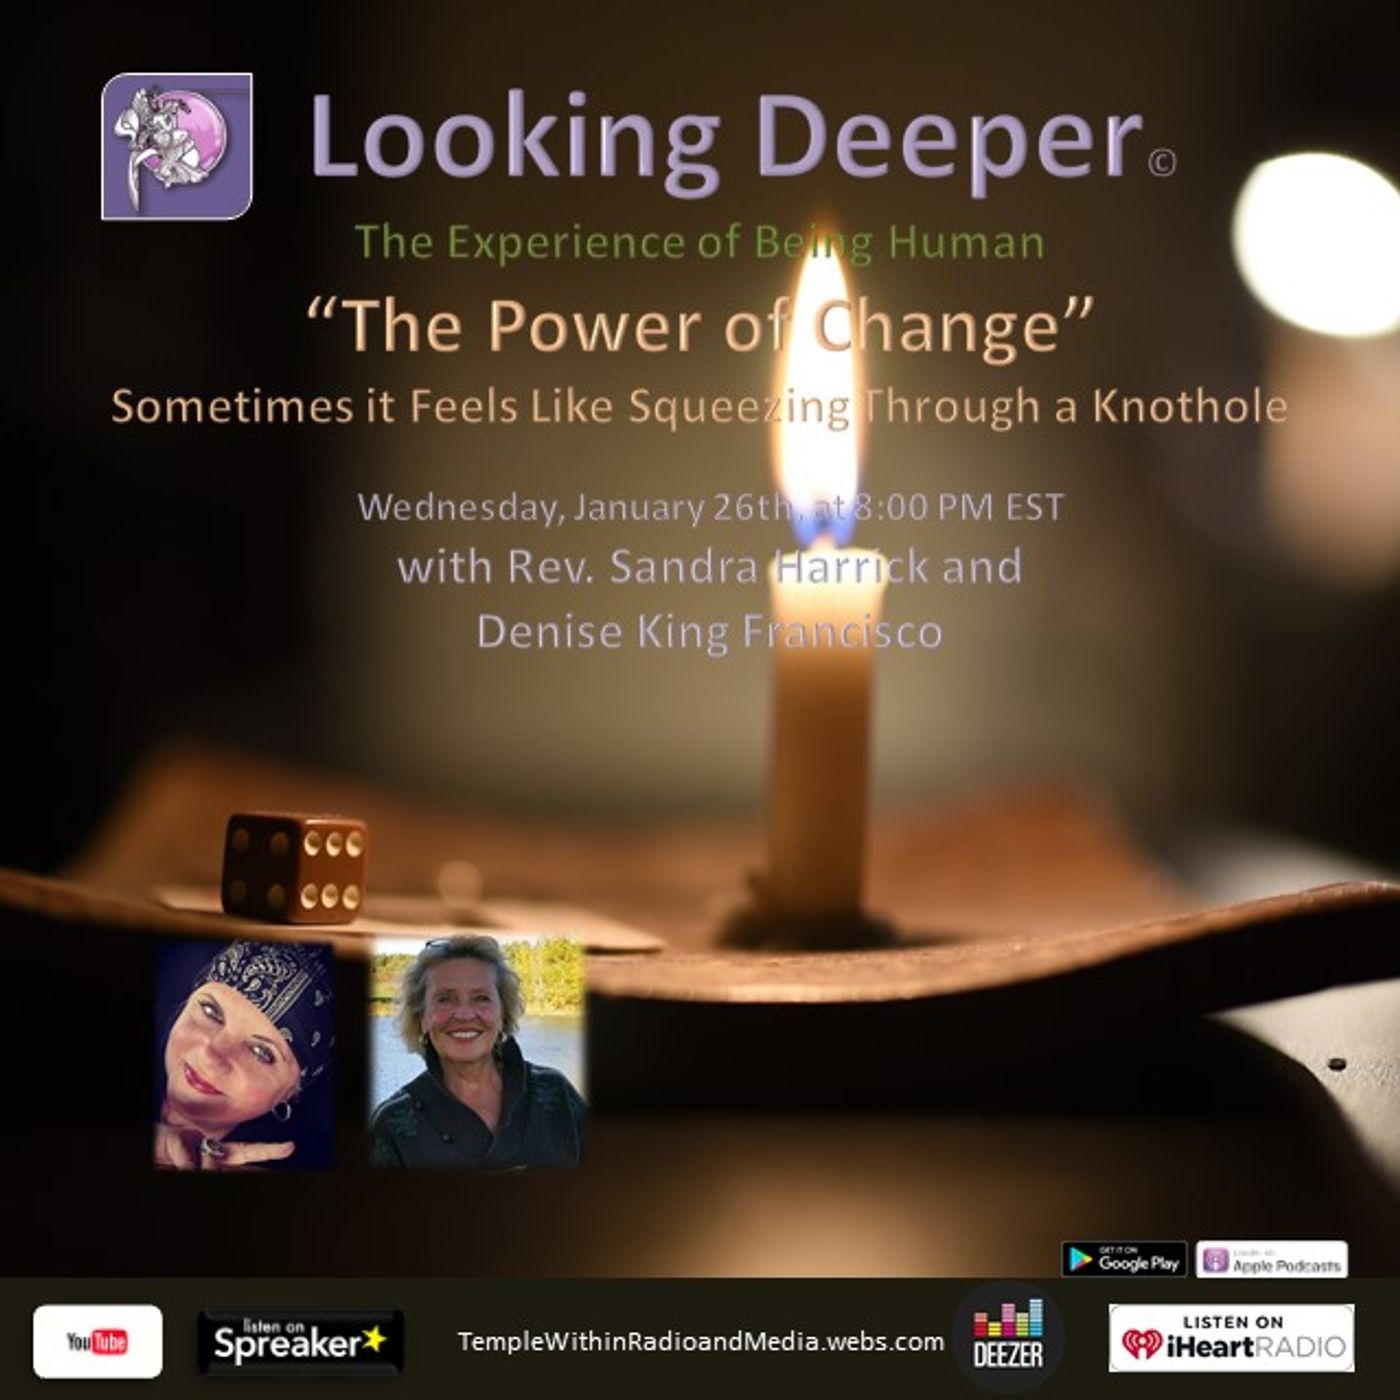 Looking Deeper at The Power of Change